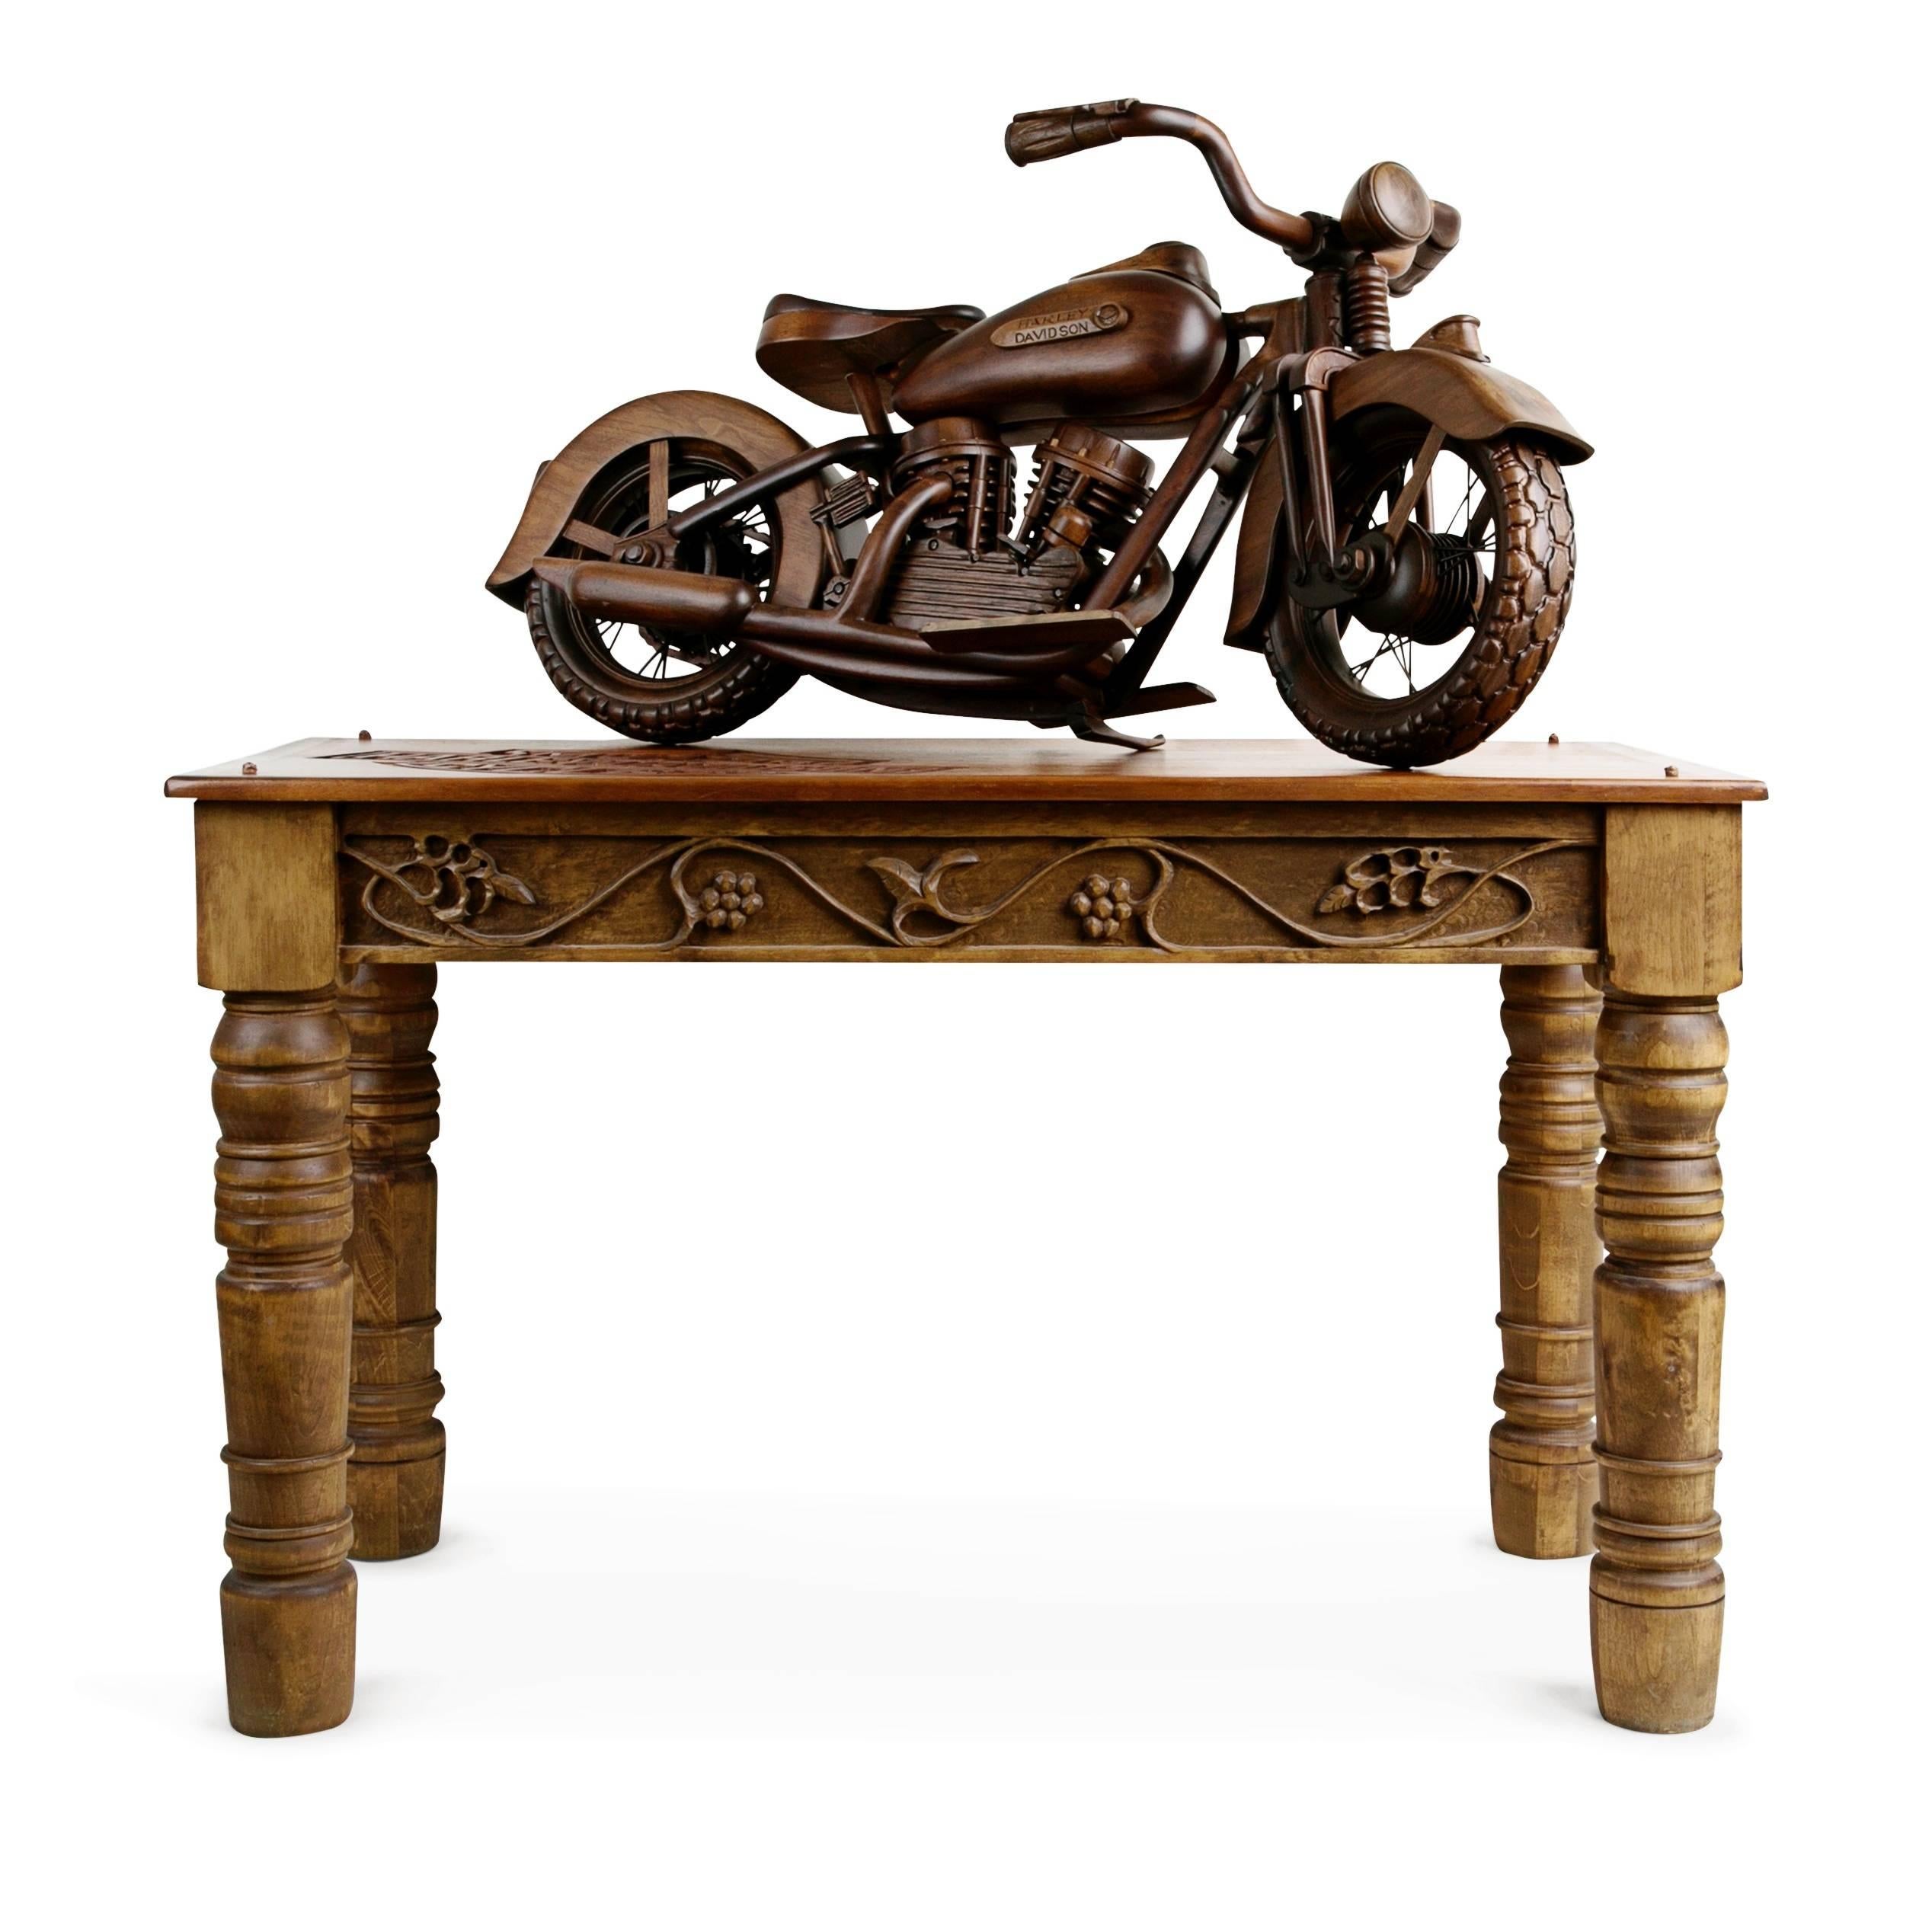 Large-scale model of a 1948 EL Panhead Harley Davidson with custom made display case fabricated in 1991 by woodworker John Hanson. This expertly crafted model has been intricately constructed to the highest detail utilizing various tones of walnut